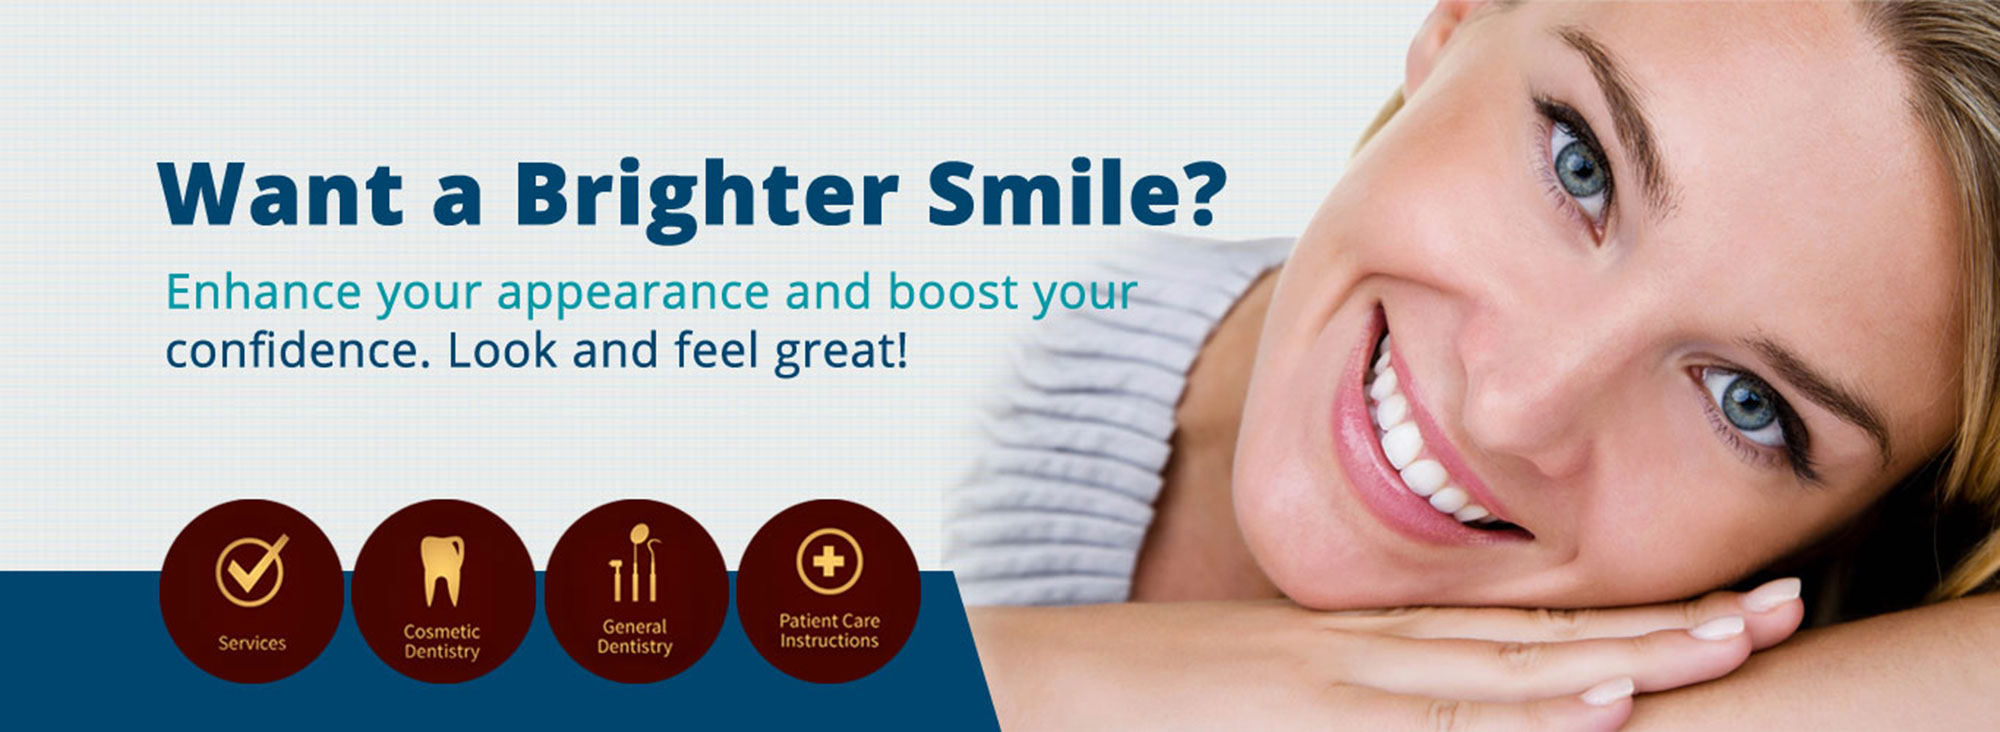 Want a Brighter Smile?